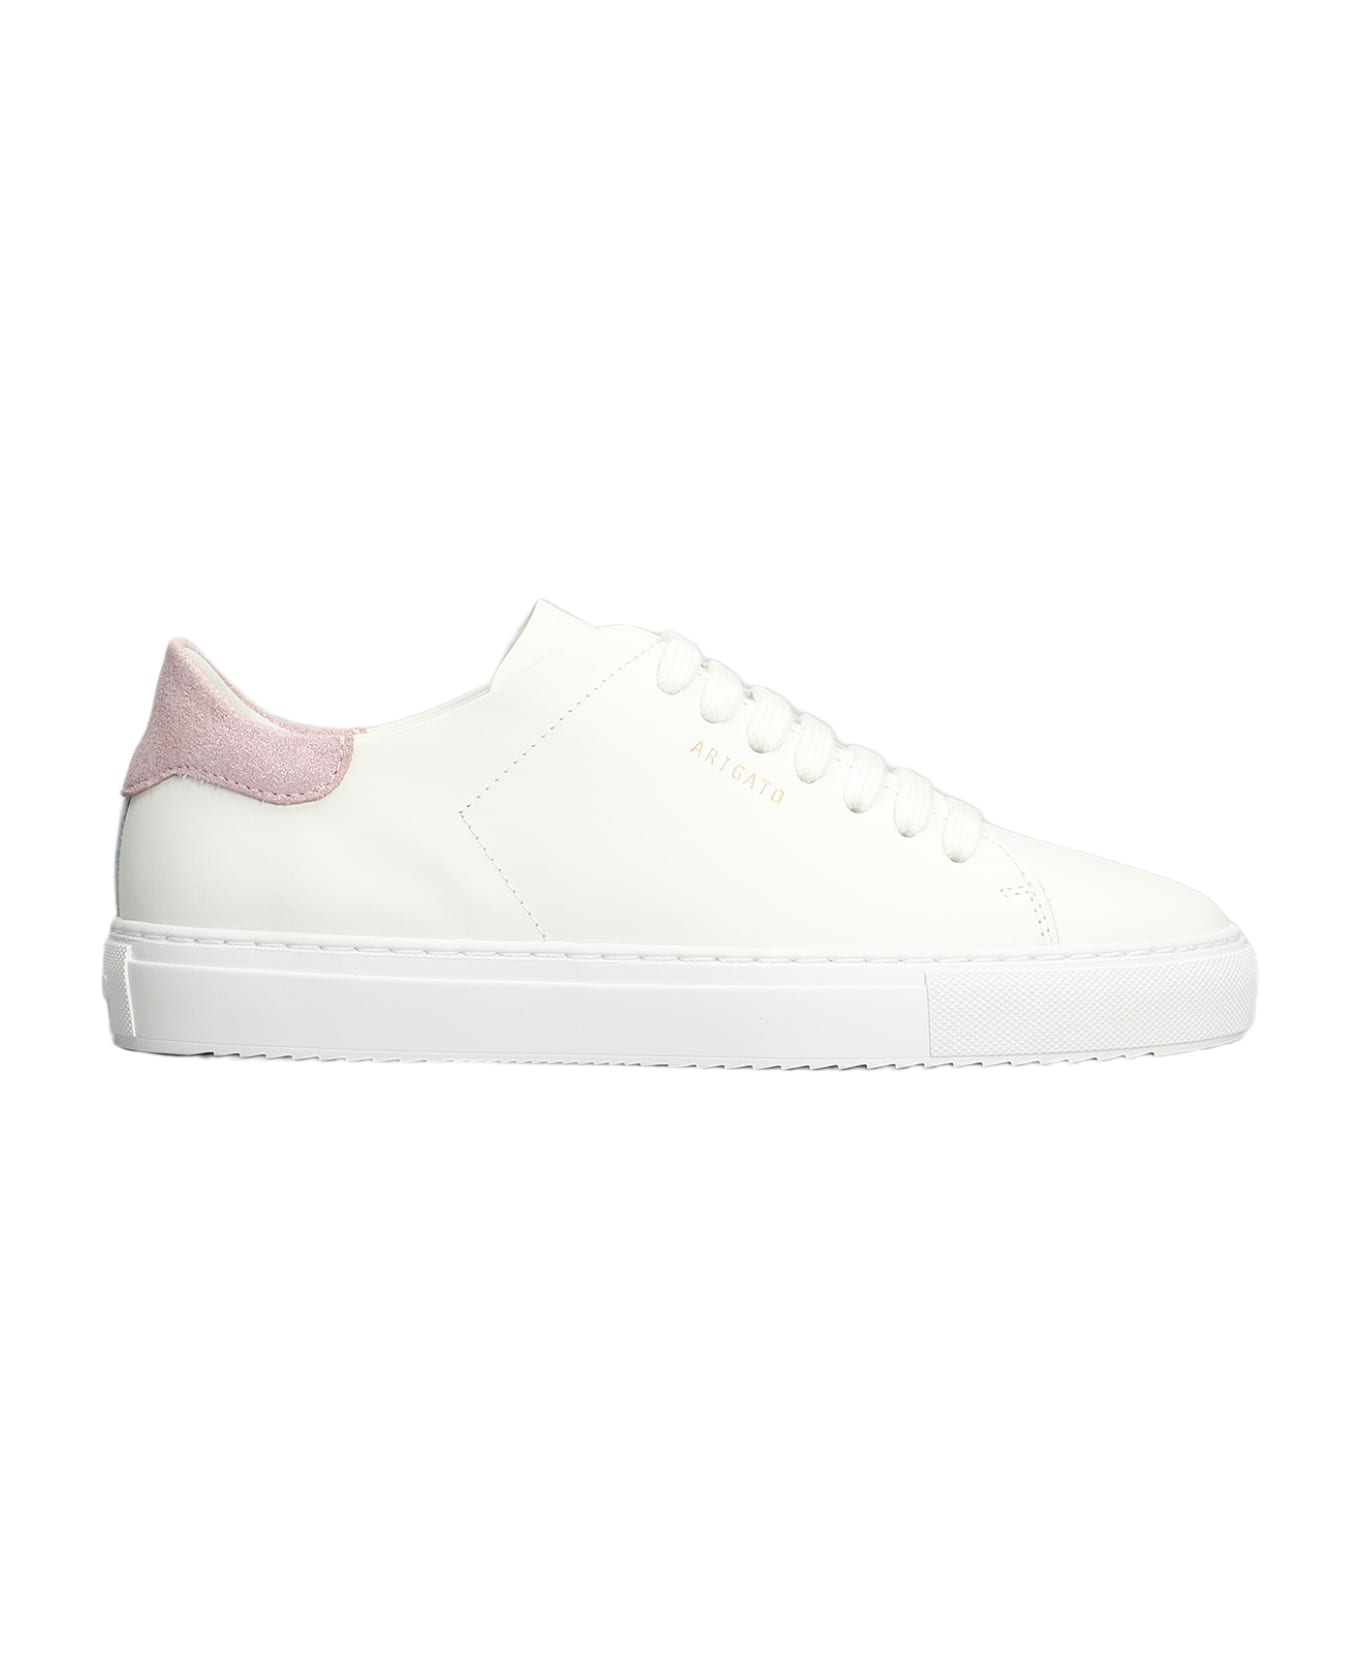 Axel Arigato Clean 90 Sneakers In White Leather - white